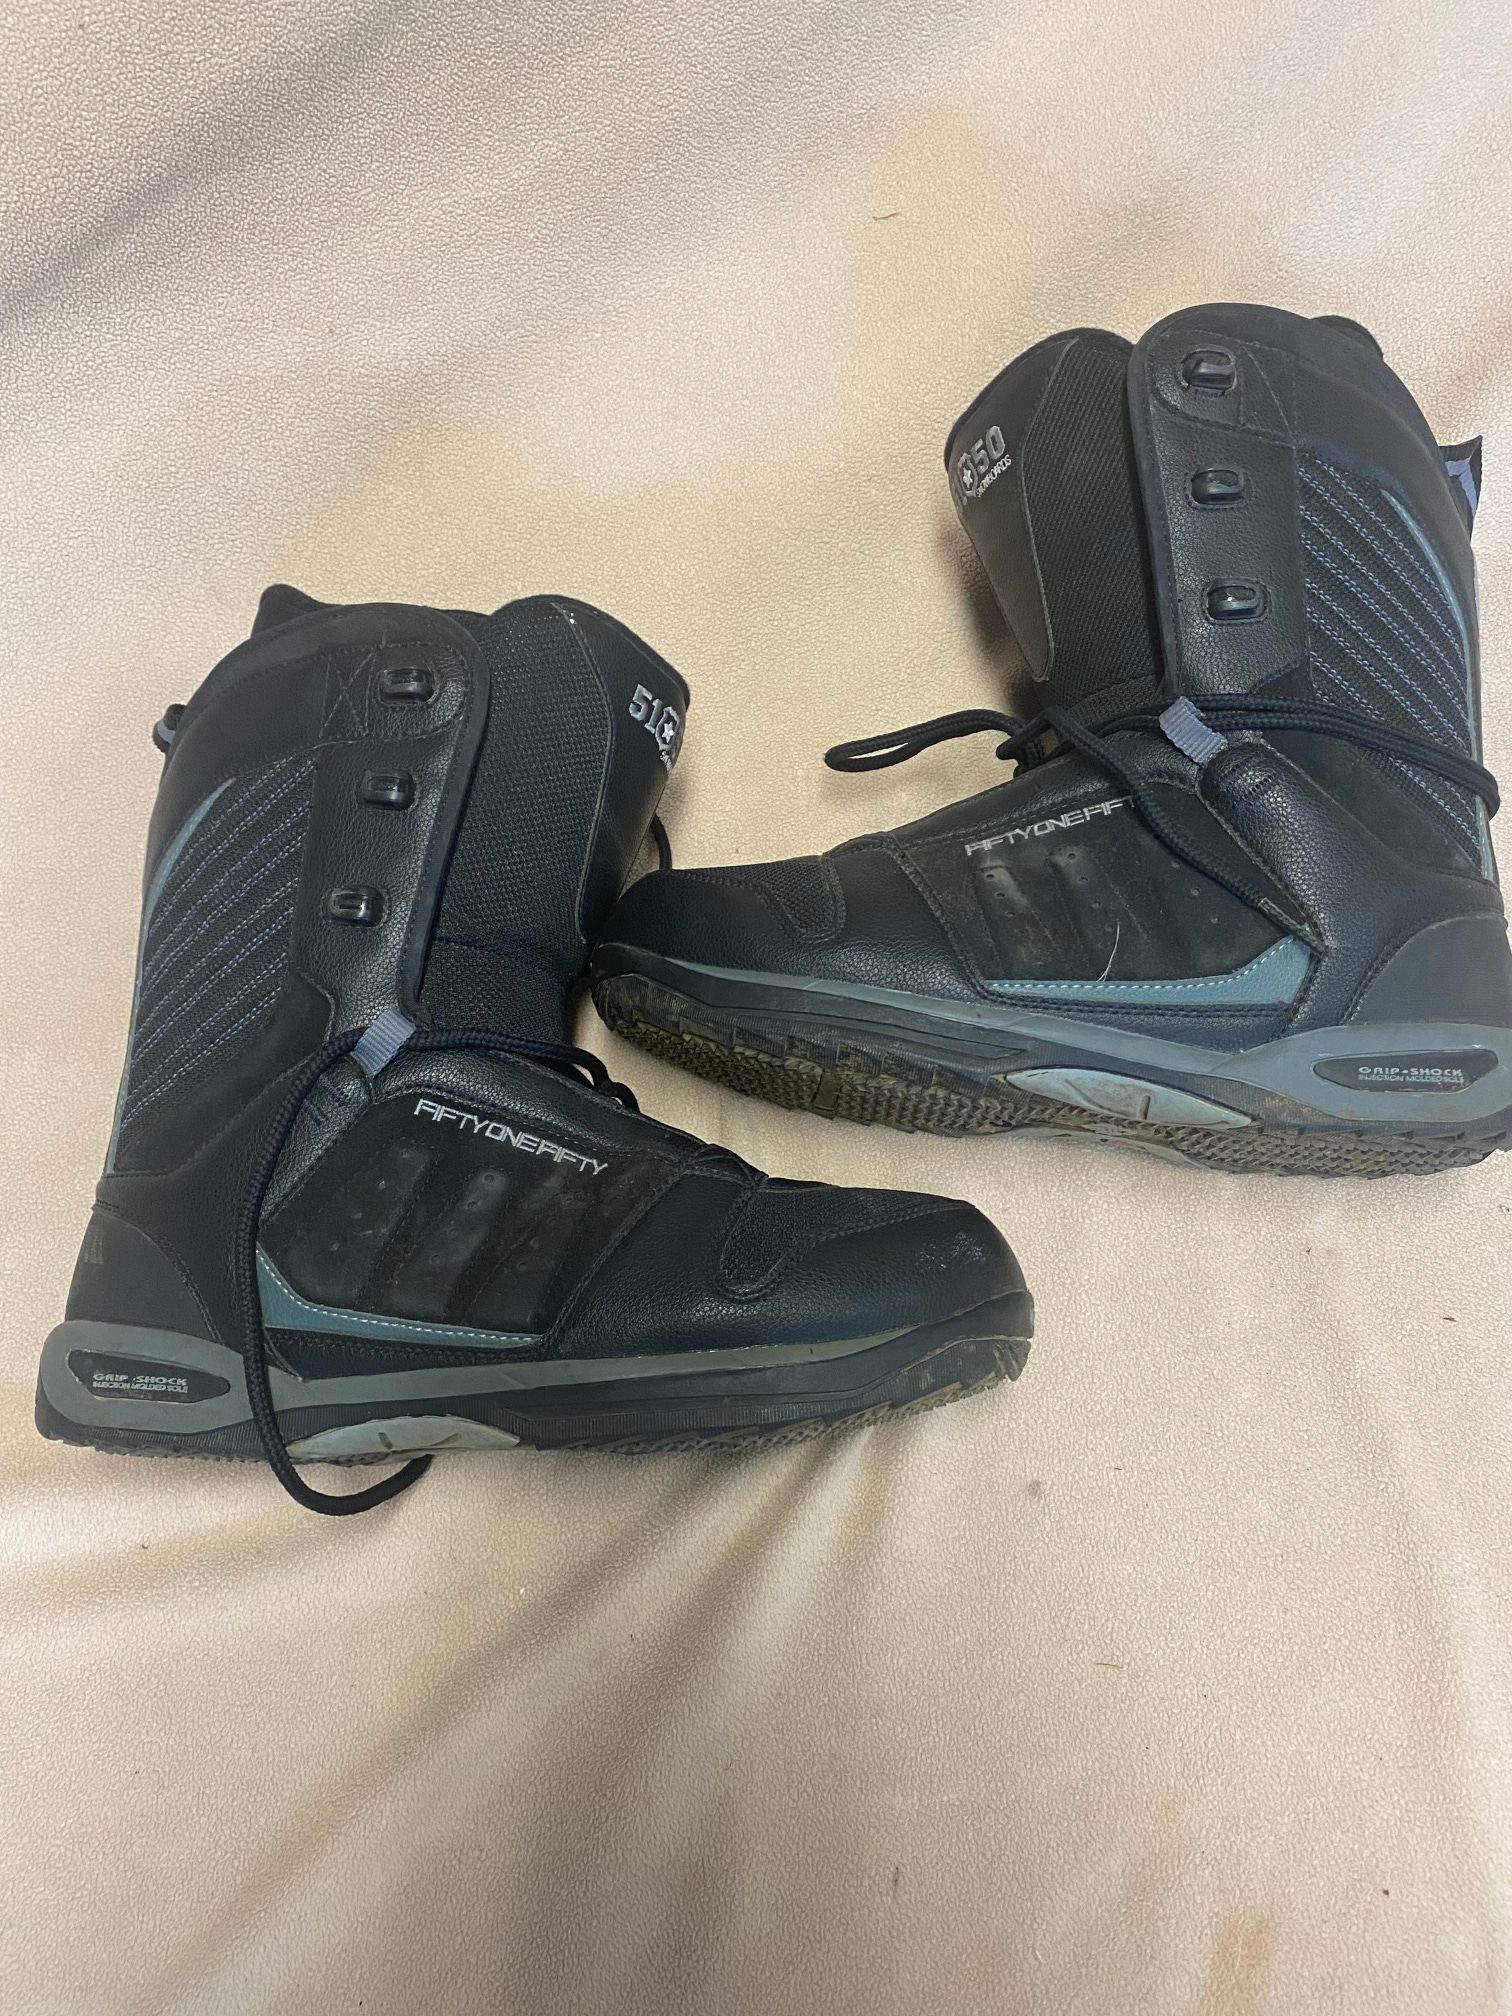 Men's Used Size 12 (Women's 13) 5150 Snowboard Boots